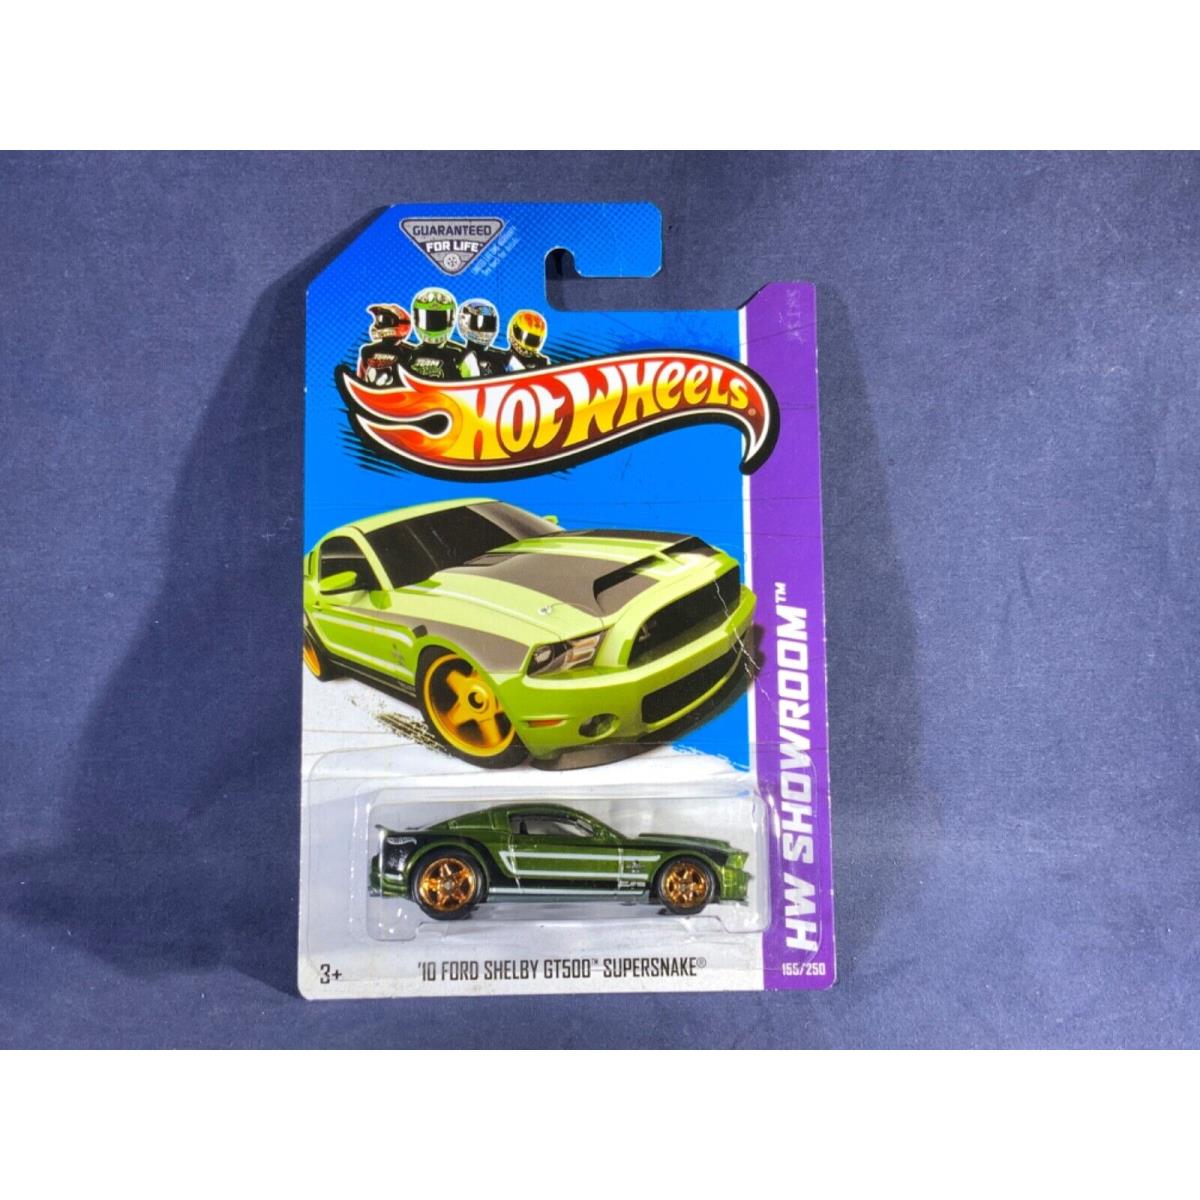 J8-43 Hot Wheels - 2010 Ford Mustang Shelby GT500 Supersnake